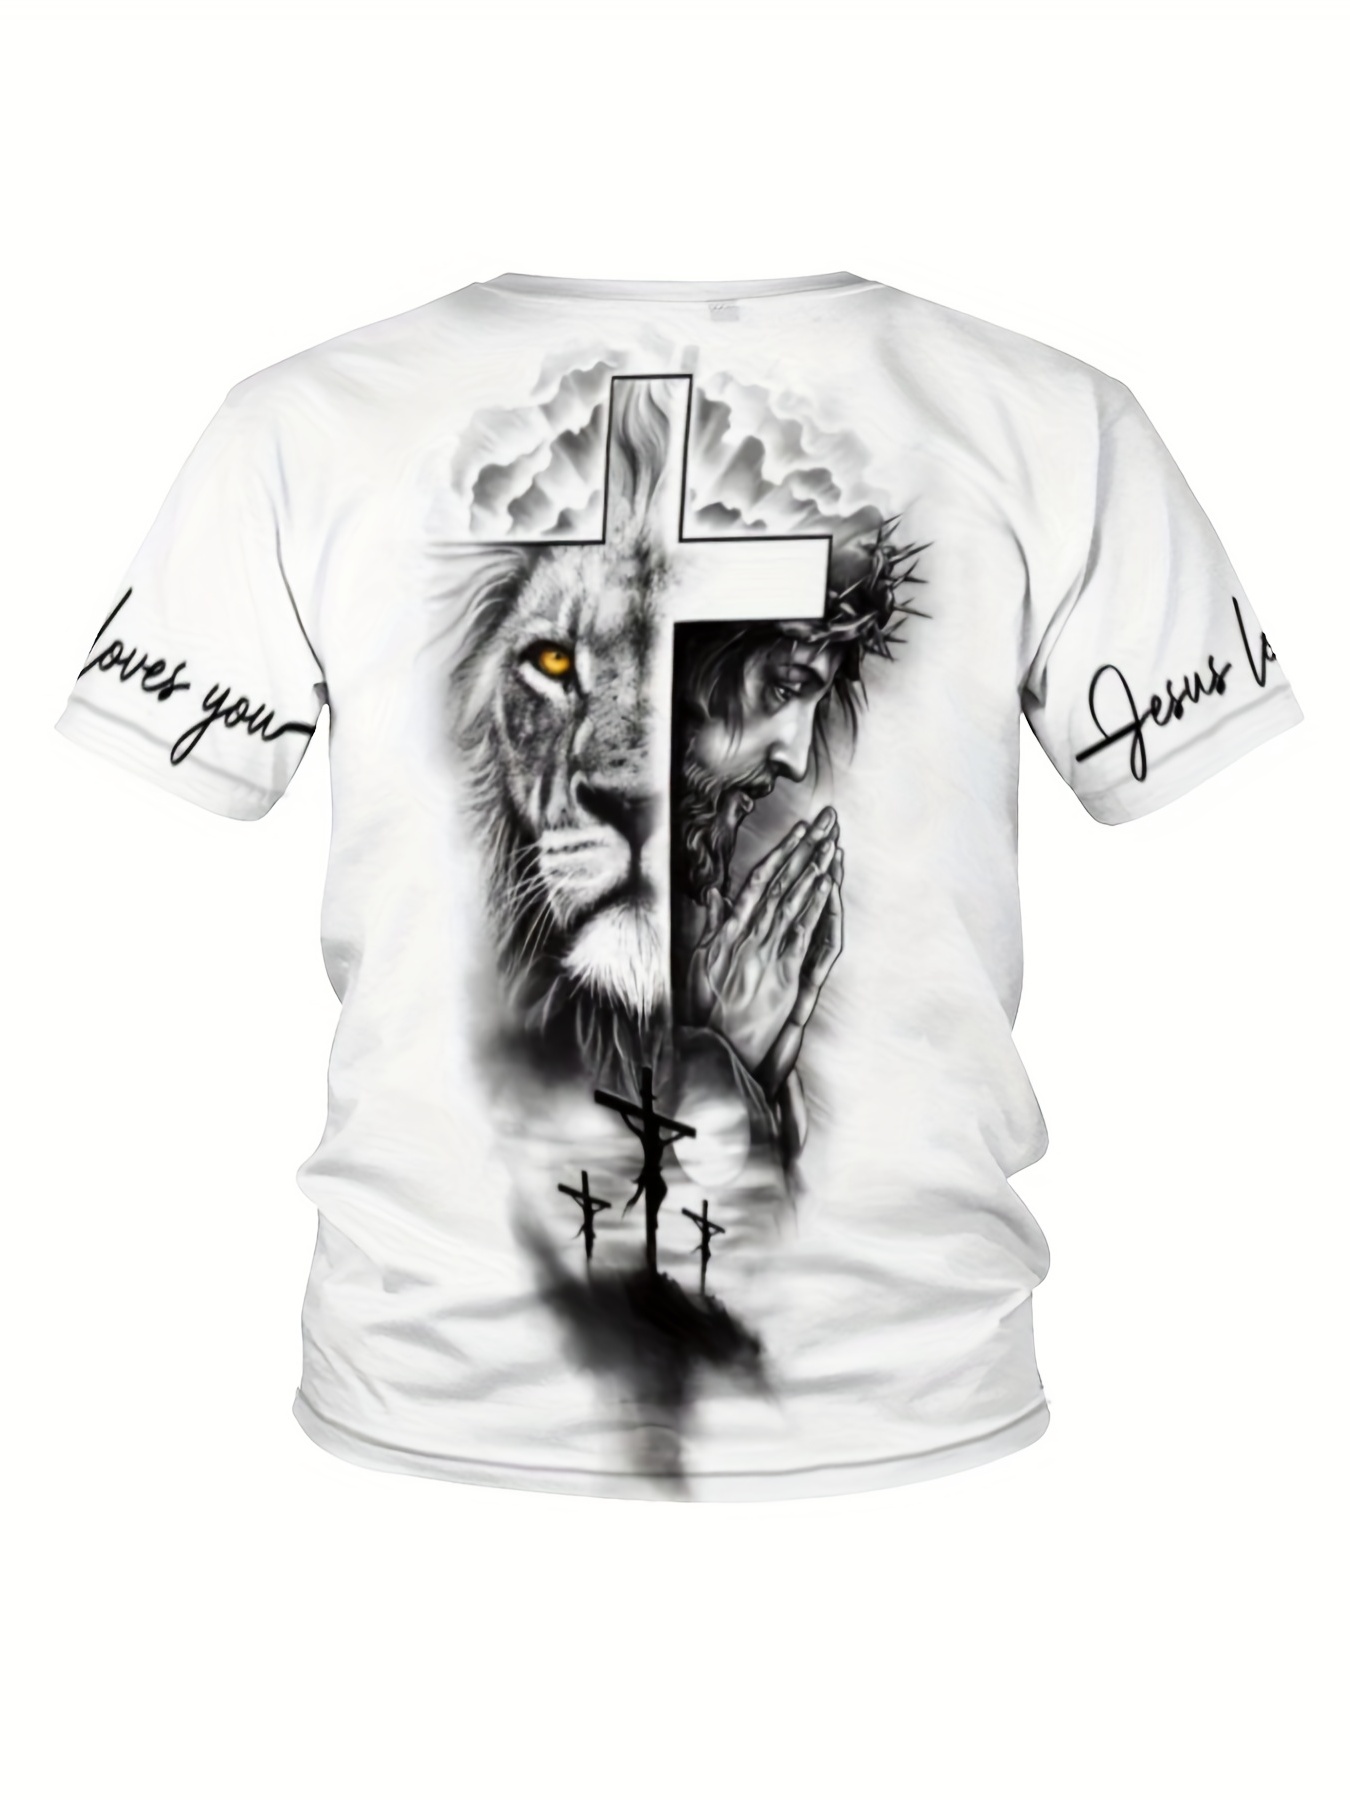 stylish cross lion pattern print mens comfy chic t shirt graphic tee mens summer outdoor clothes mens clothing tops for men gift for men details 0